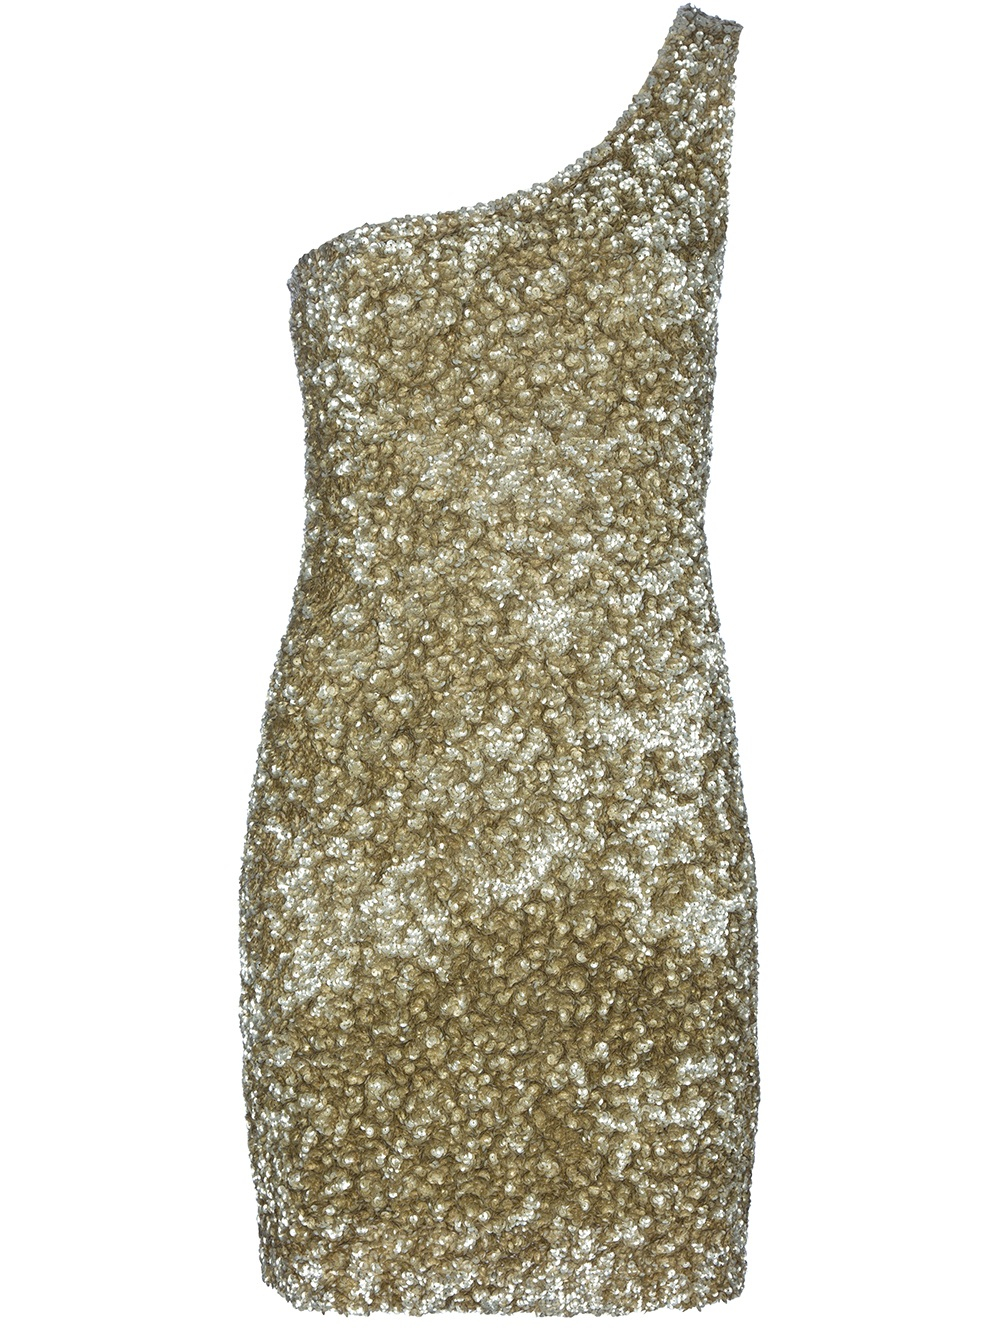 Lyst - P.A.R.O.S.H. One Shoulder Sequin Dress in Metallic